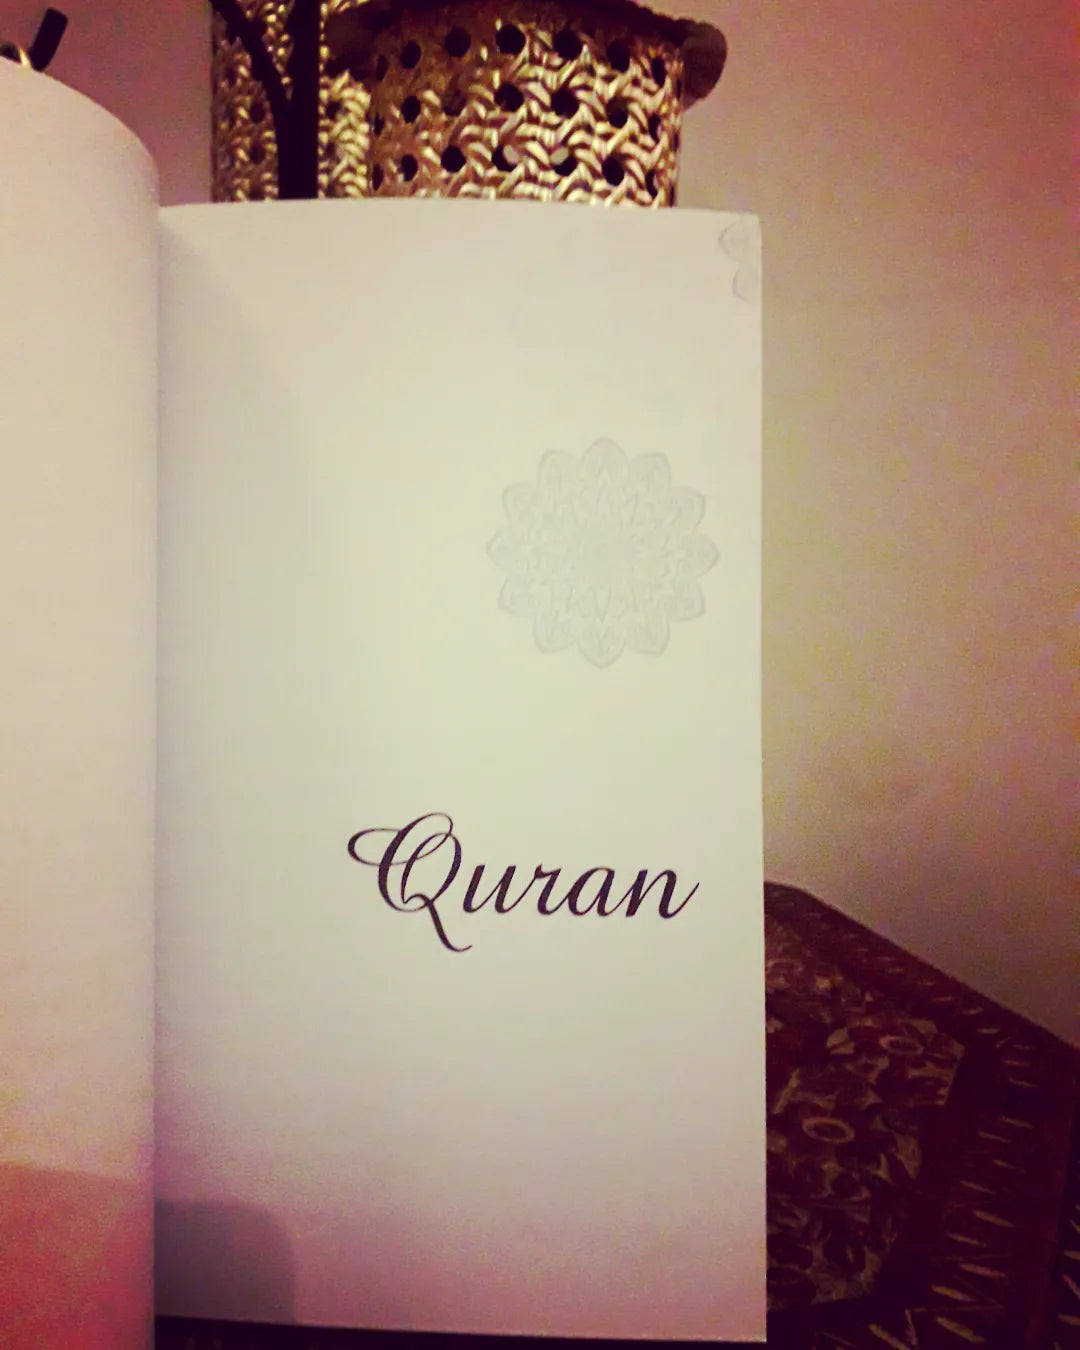 Inspired by the Quran and Sunnah